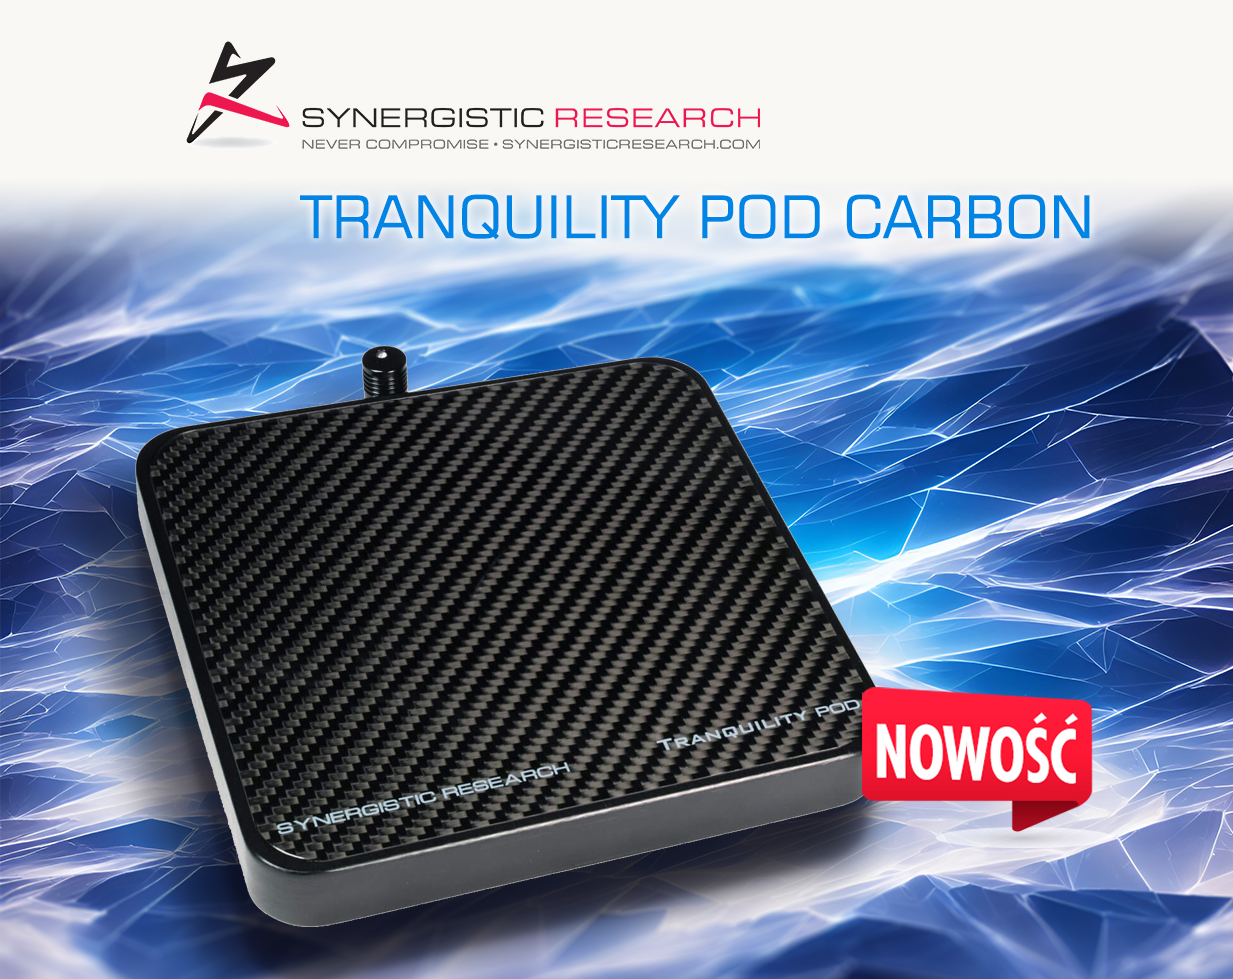 TranquilityPODcarbon news